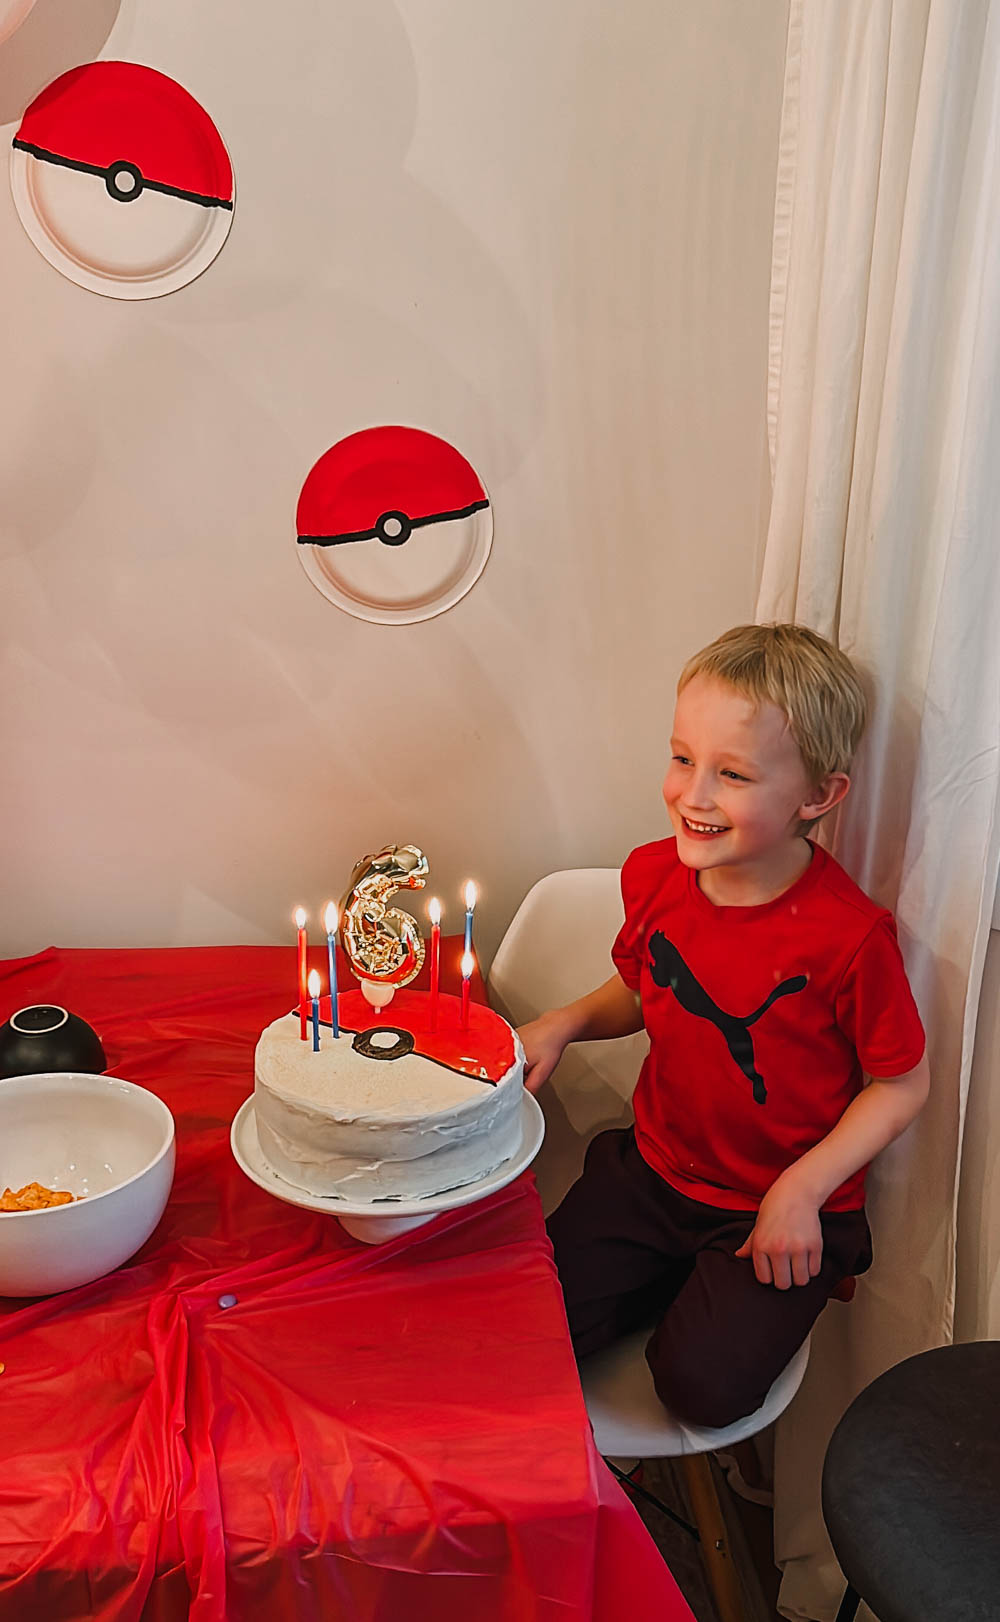 Pokeball cake with candles